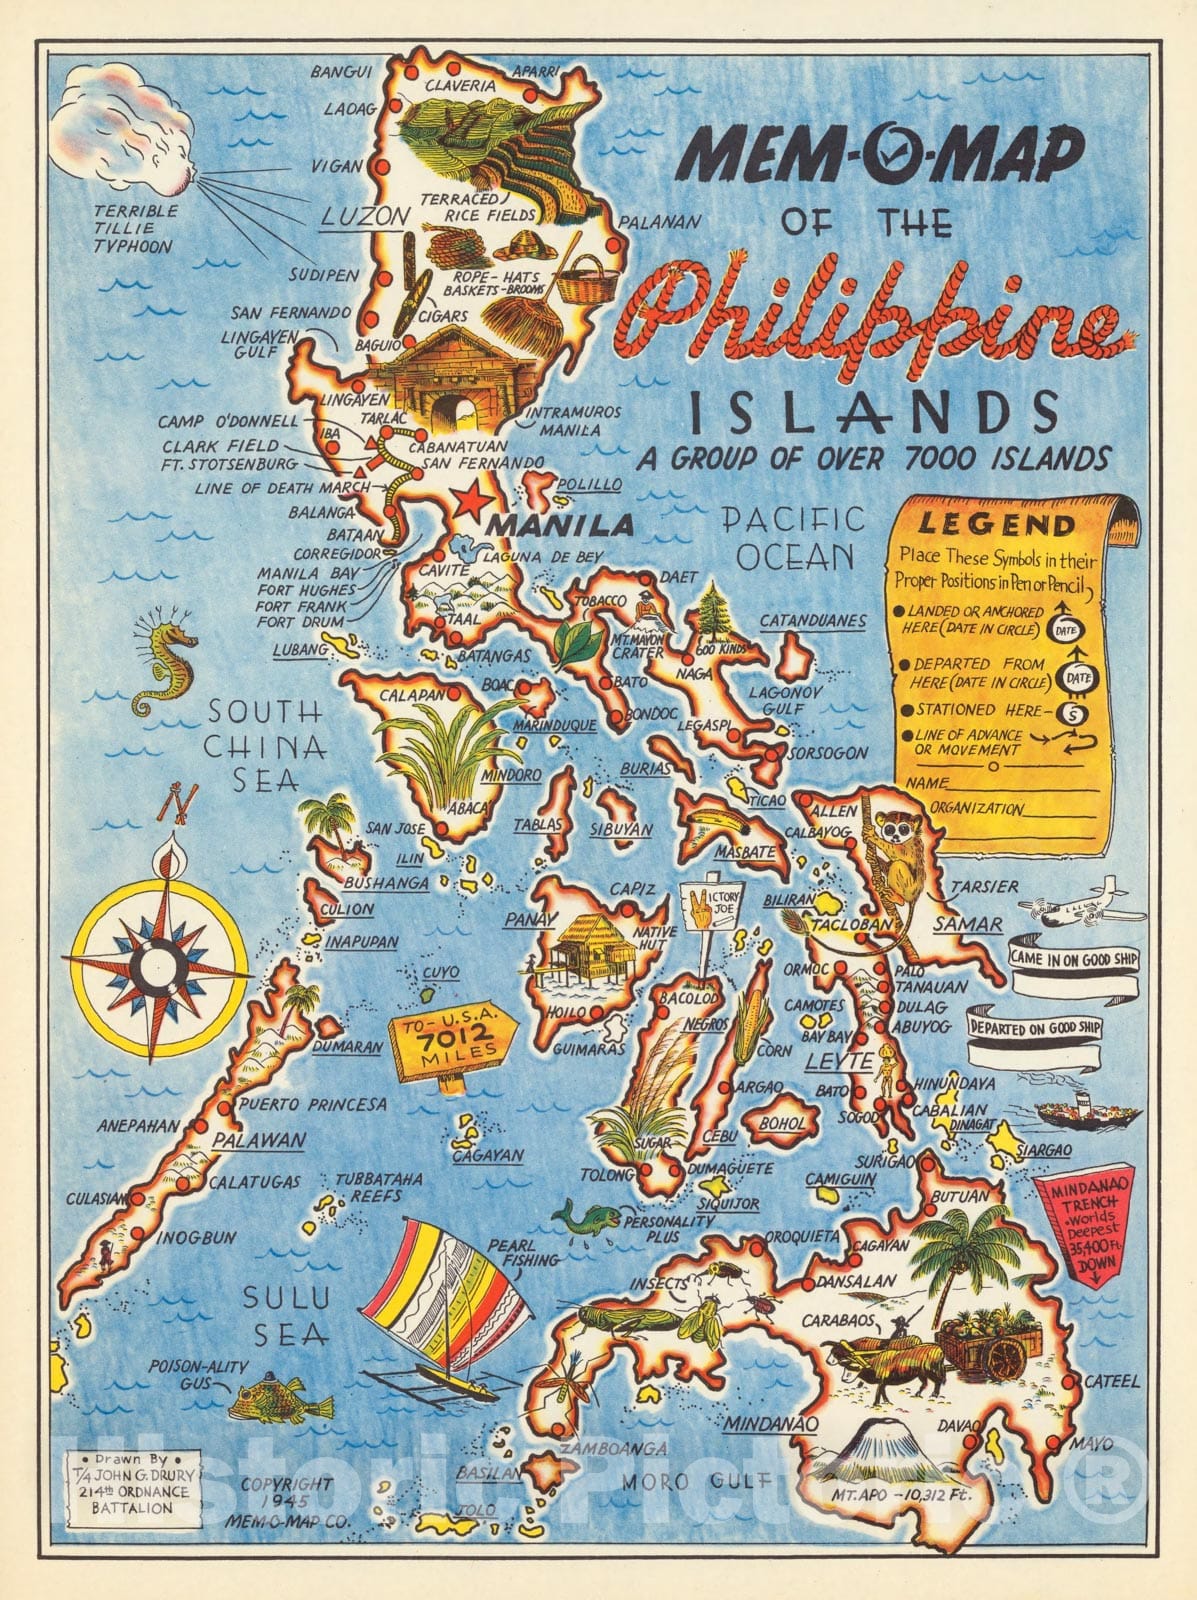 Historic Map - Mem-O-Map of The Philippine Islands, 1945 Pictorial Map - Vintage Wall Art